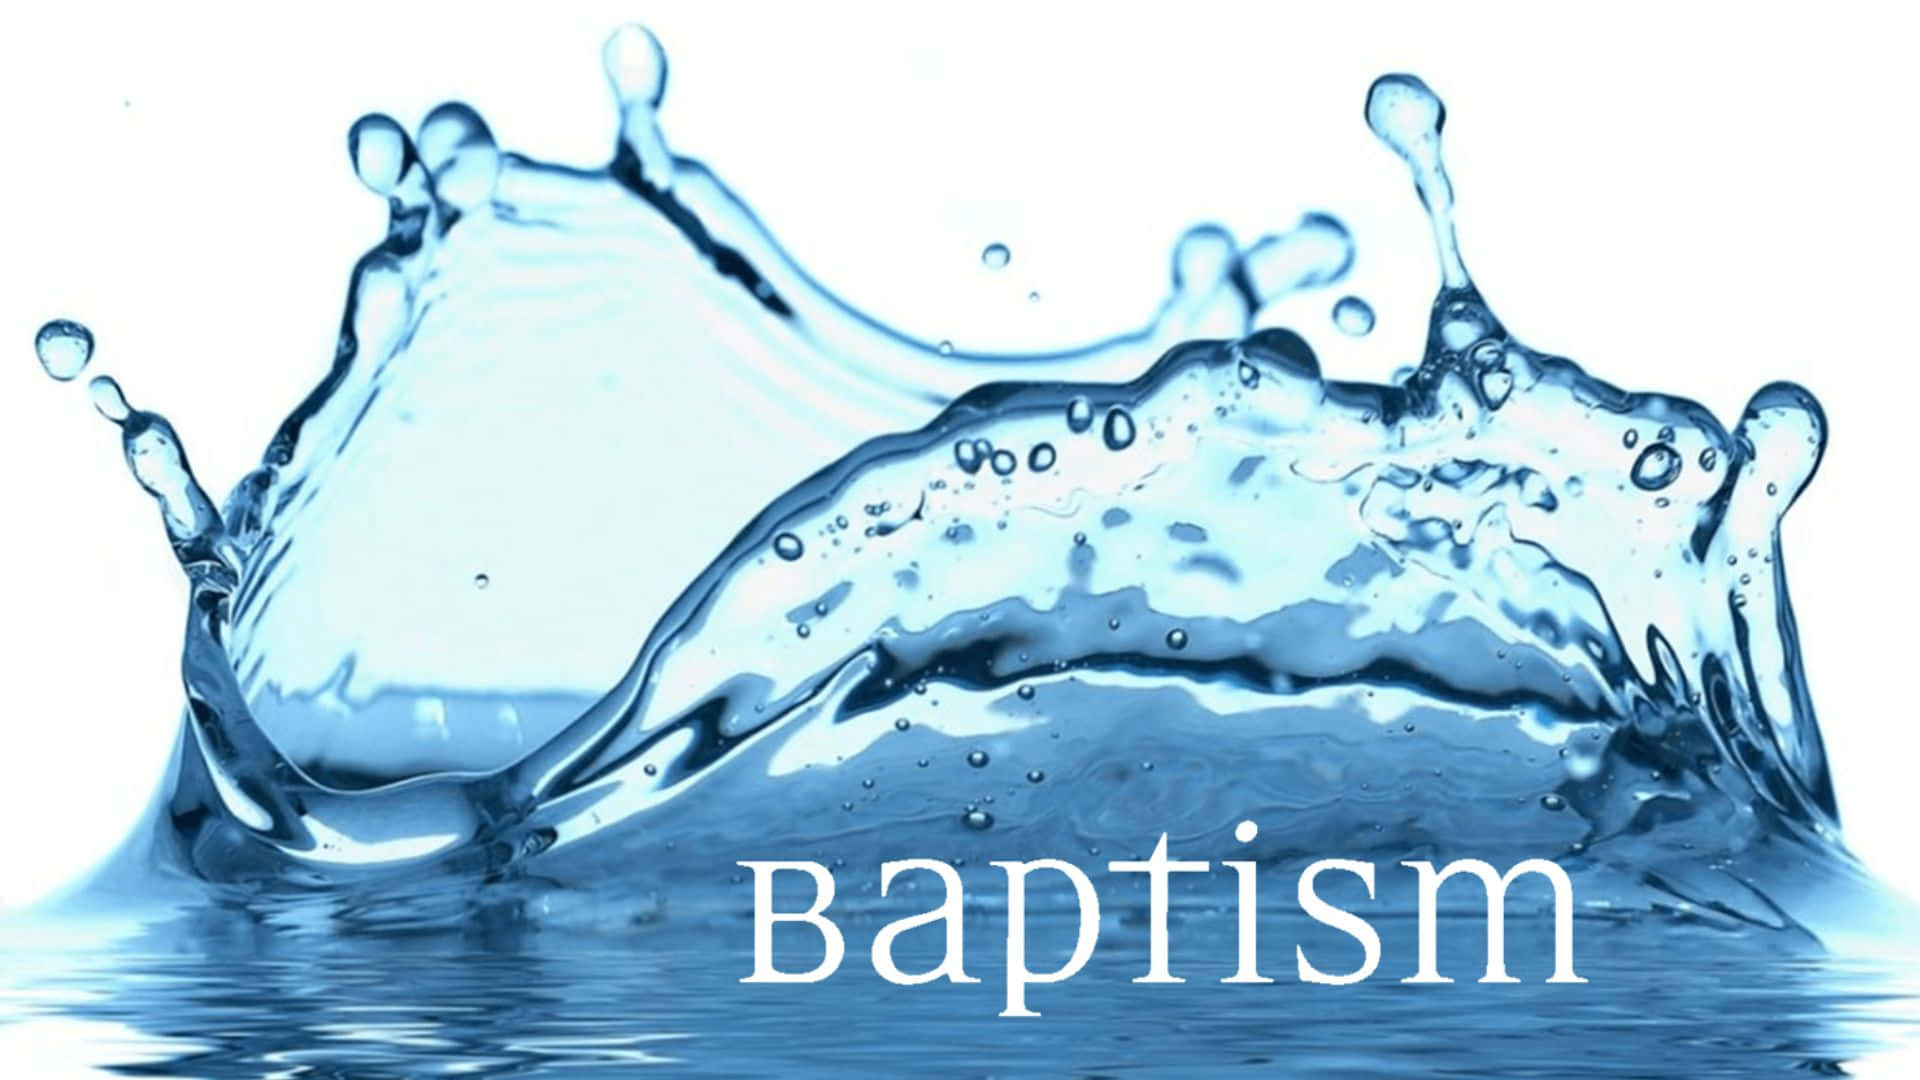 water baptism backgrounds